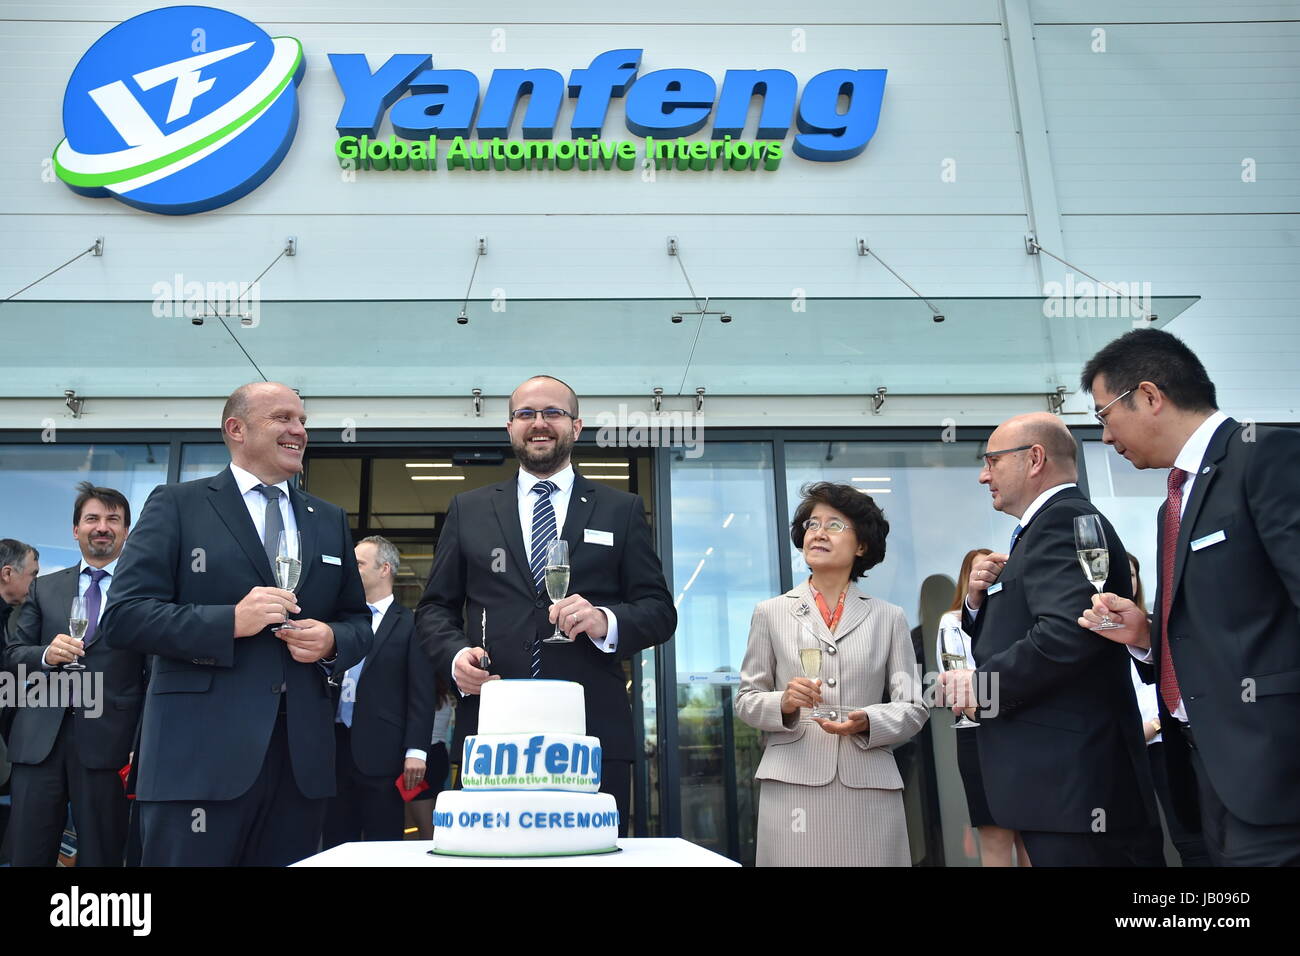 The Yangfeng Automotive Interiors (YFAI) opens new car interior production plant in Plana nad Luznici, Czech Republic, on June 8, 2017. L-R Vice President and General Manager, Interiors Europe+Afrika YFAI Jochen Heier, YFAI Plana nad Luznici plant manager Jiri Rosner, Chinese ambassador to Czech Republic Ma Keqing, YFAI CEO Johannes Roters and Deputy General Manager Yanfeng Automotive Interiors Europe Joseph Lee during the opening ceremony. (CTK Photo/Vaclav Pancer) Stock Photo